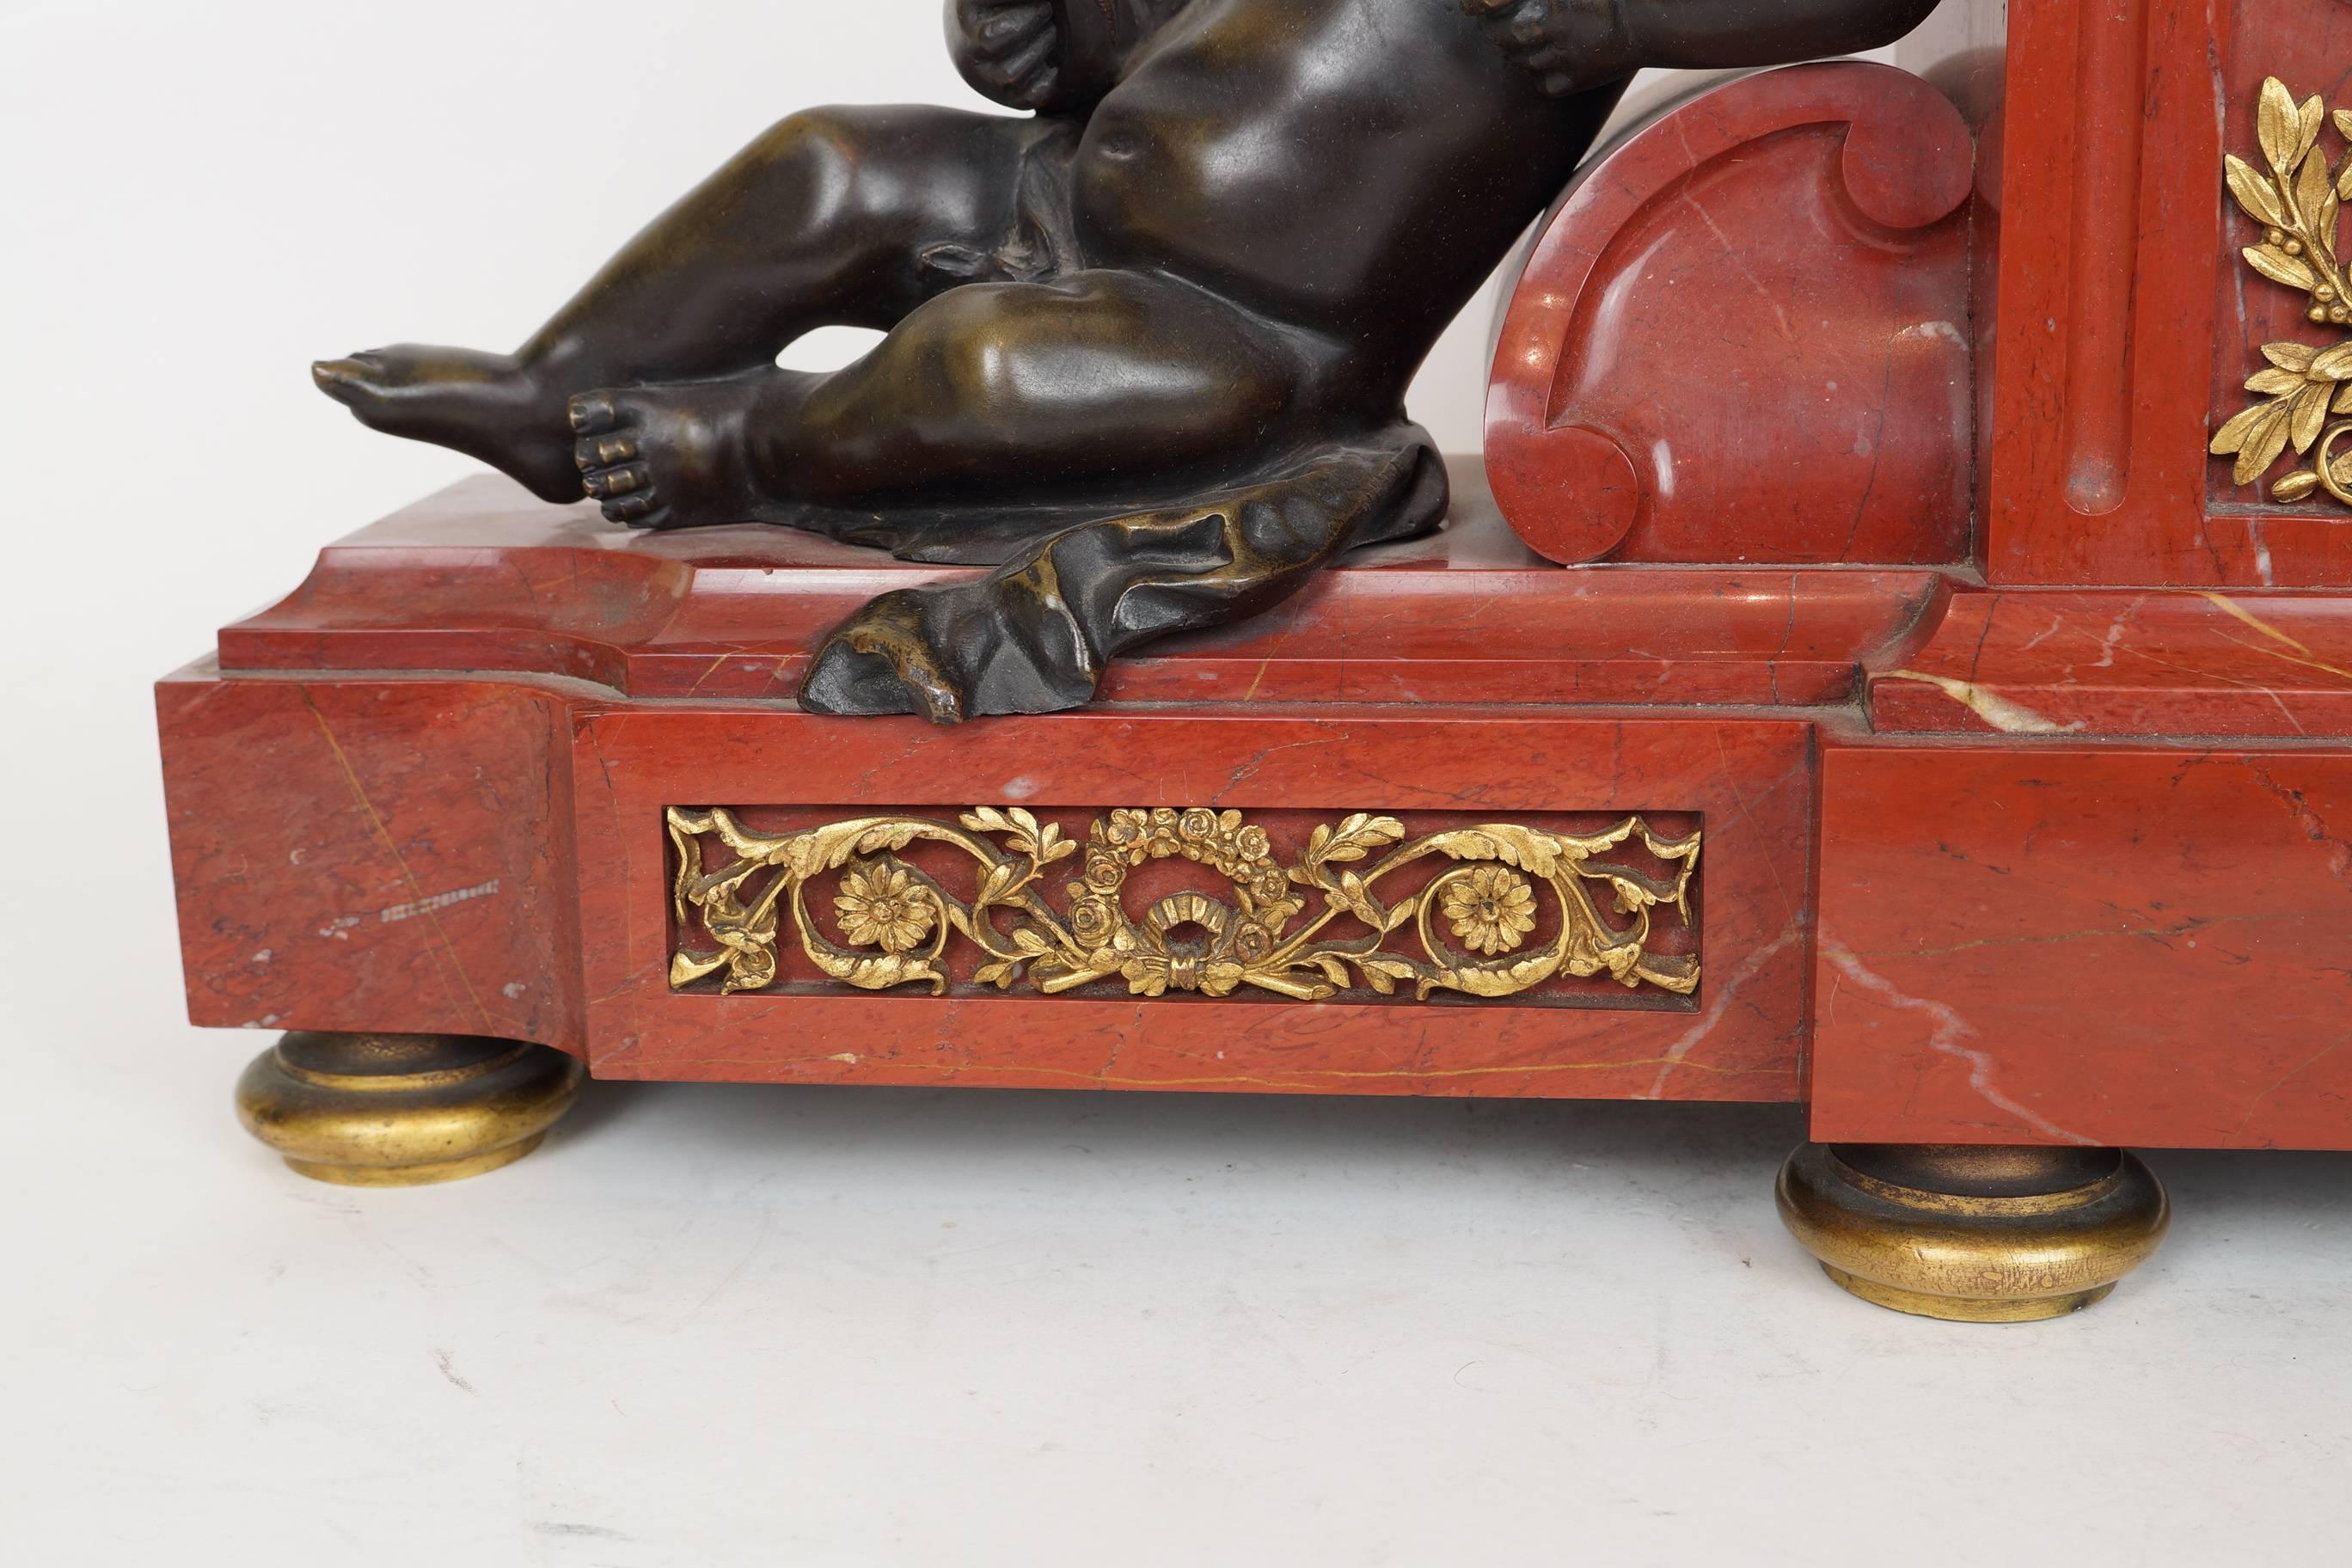 19th Century Rouge Marble and Bronze Mantel Clock by Tiffany and Company with Seated Putti